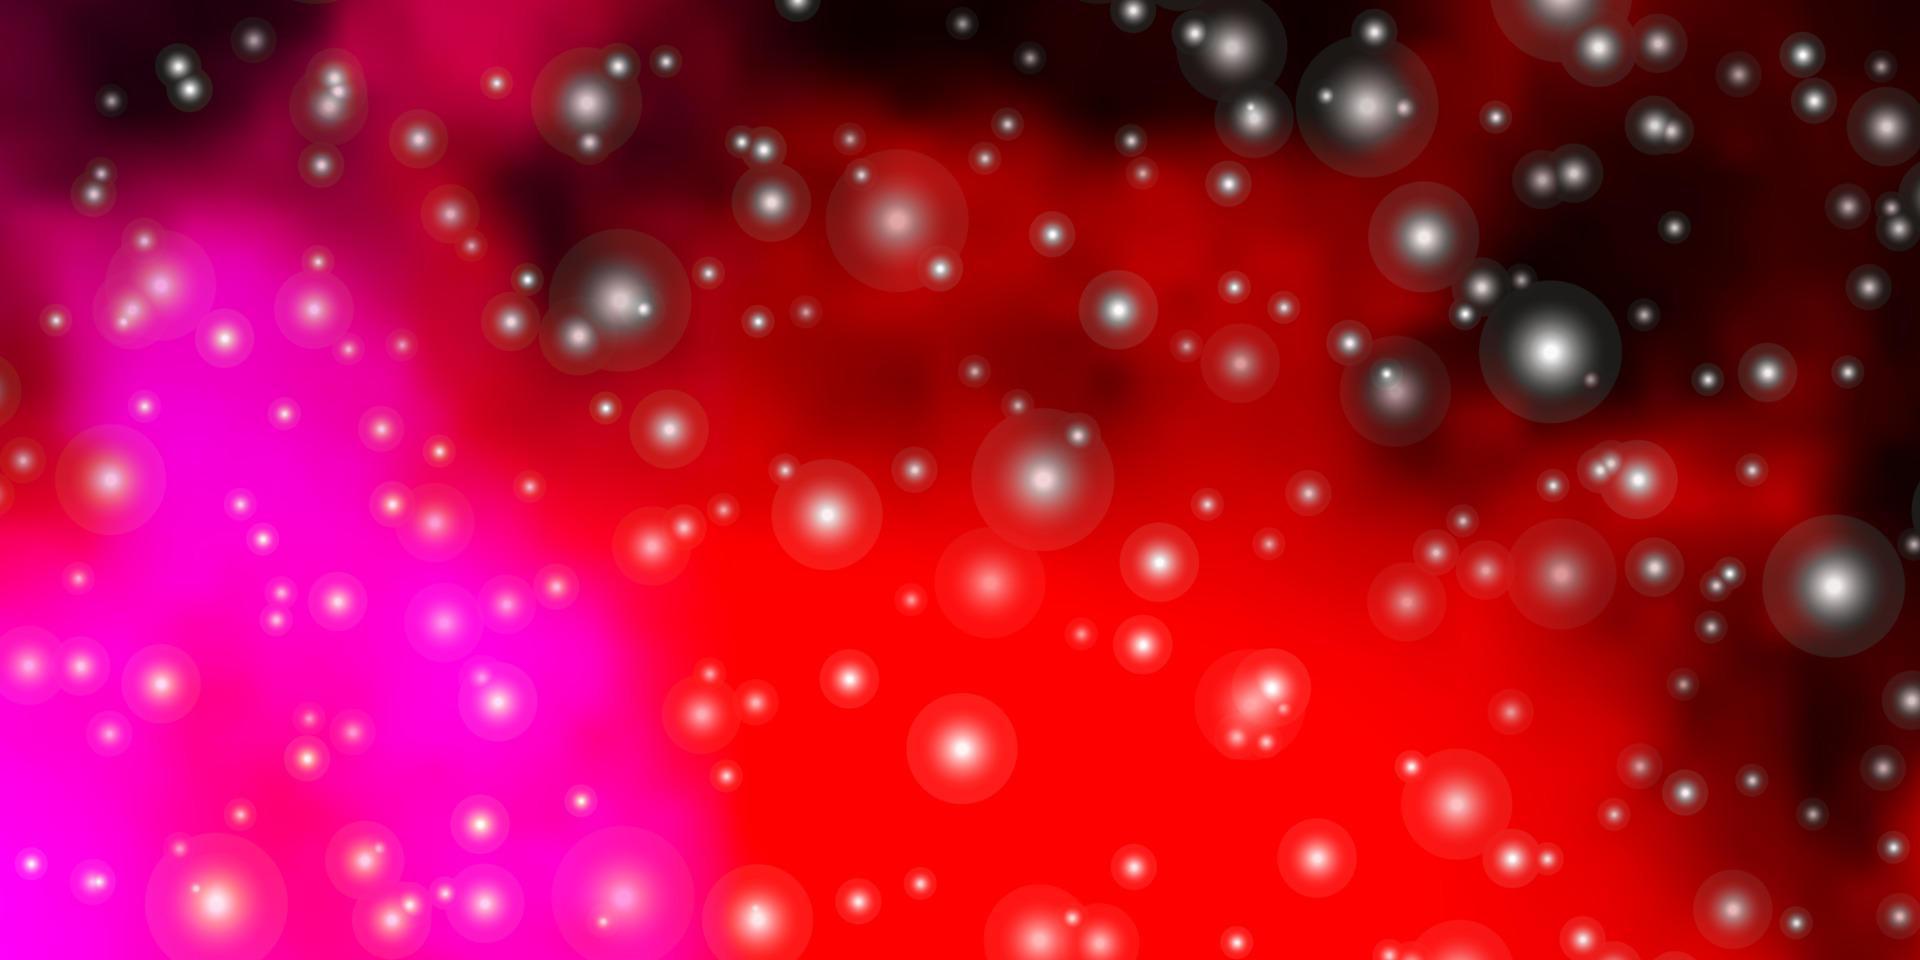 Dark Pink, Yellow vector background with small and big stars.